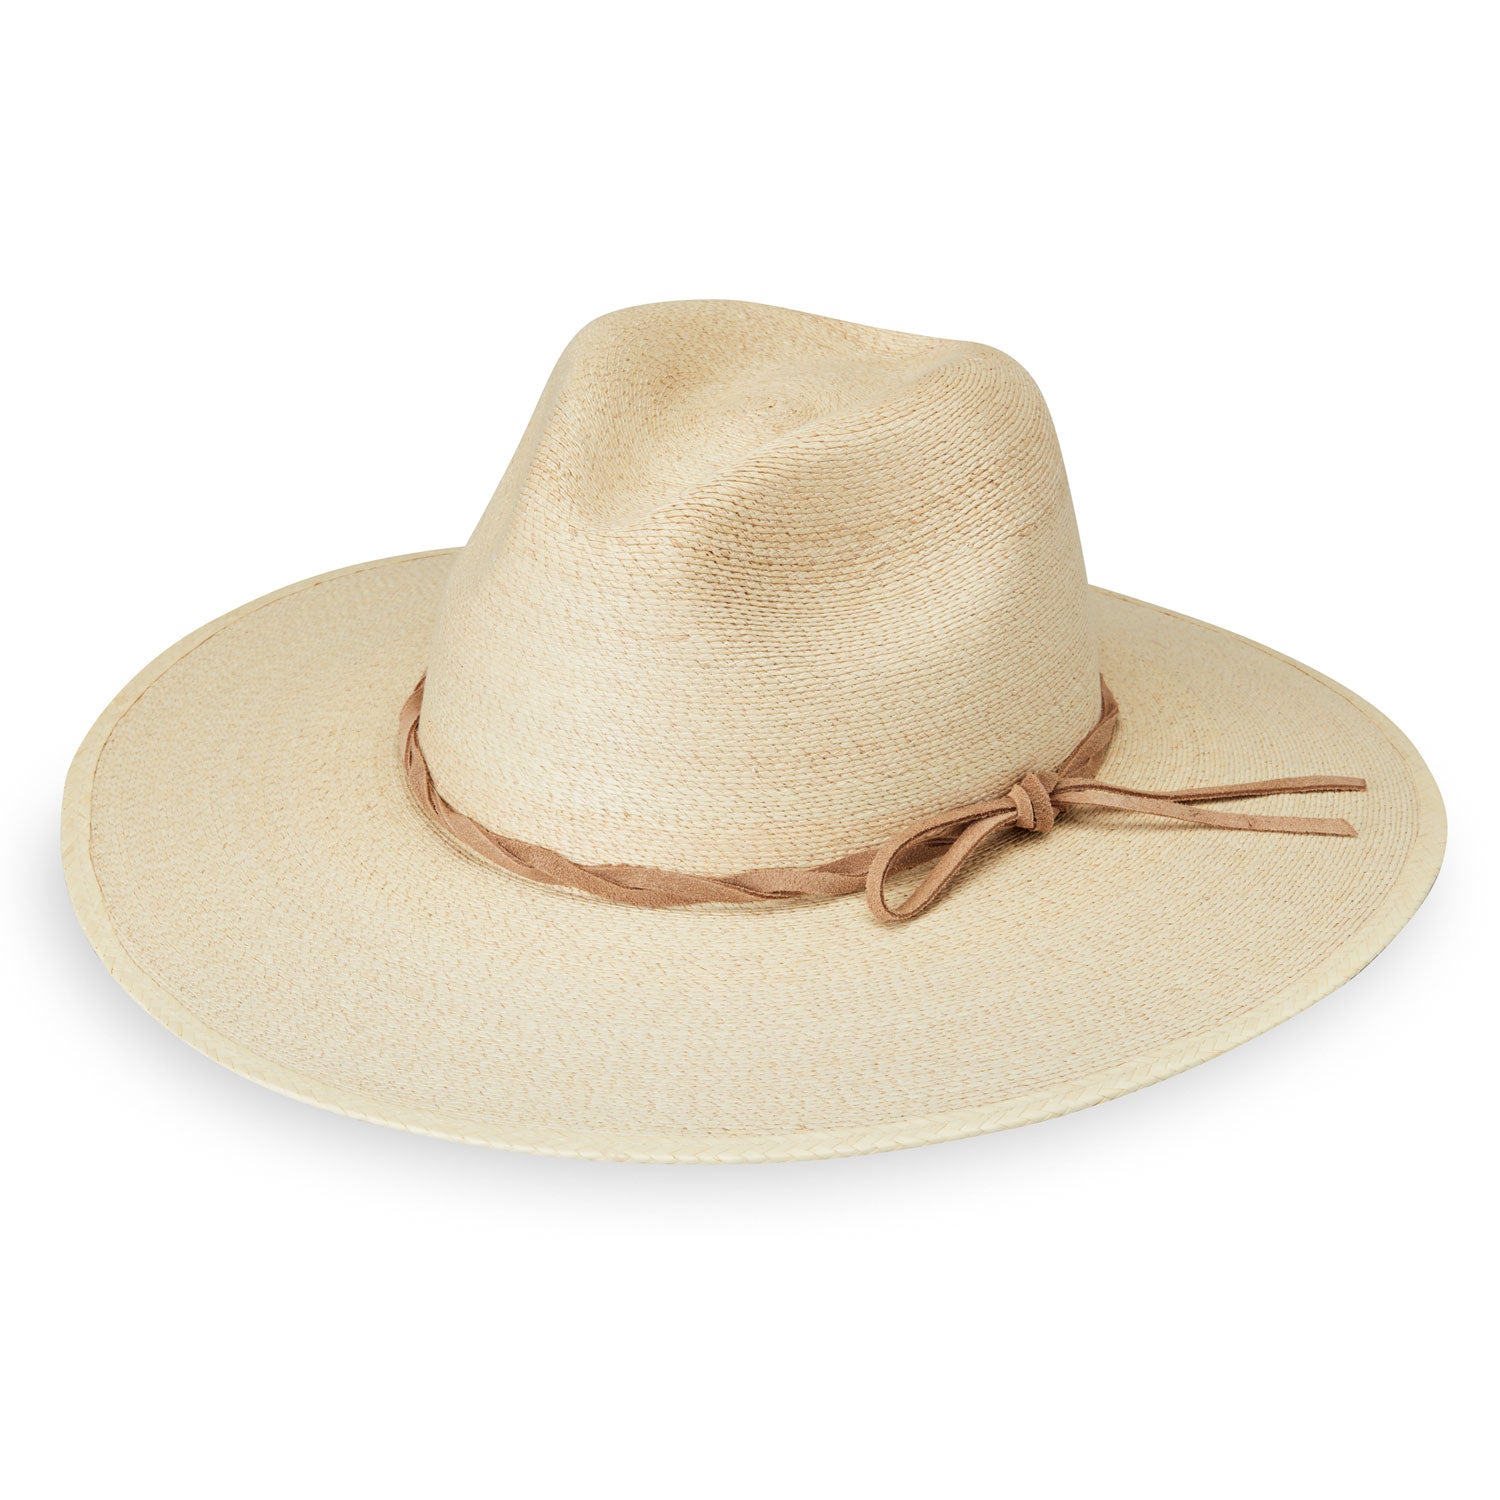 Featuring Front of Unisex Wide Brim Fedora Style Tulum UPF Sun Hat made of Natural Palm Fiber from Wallaroo